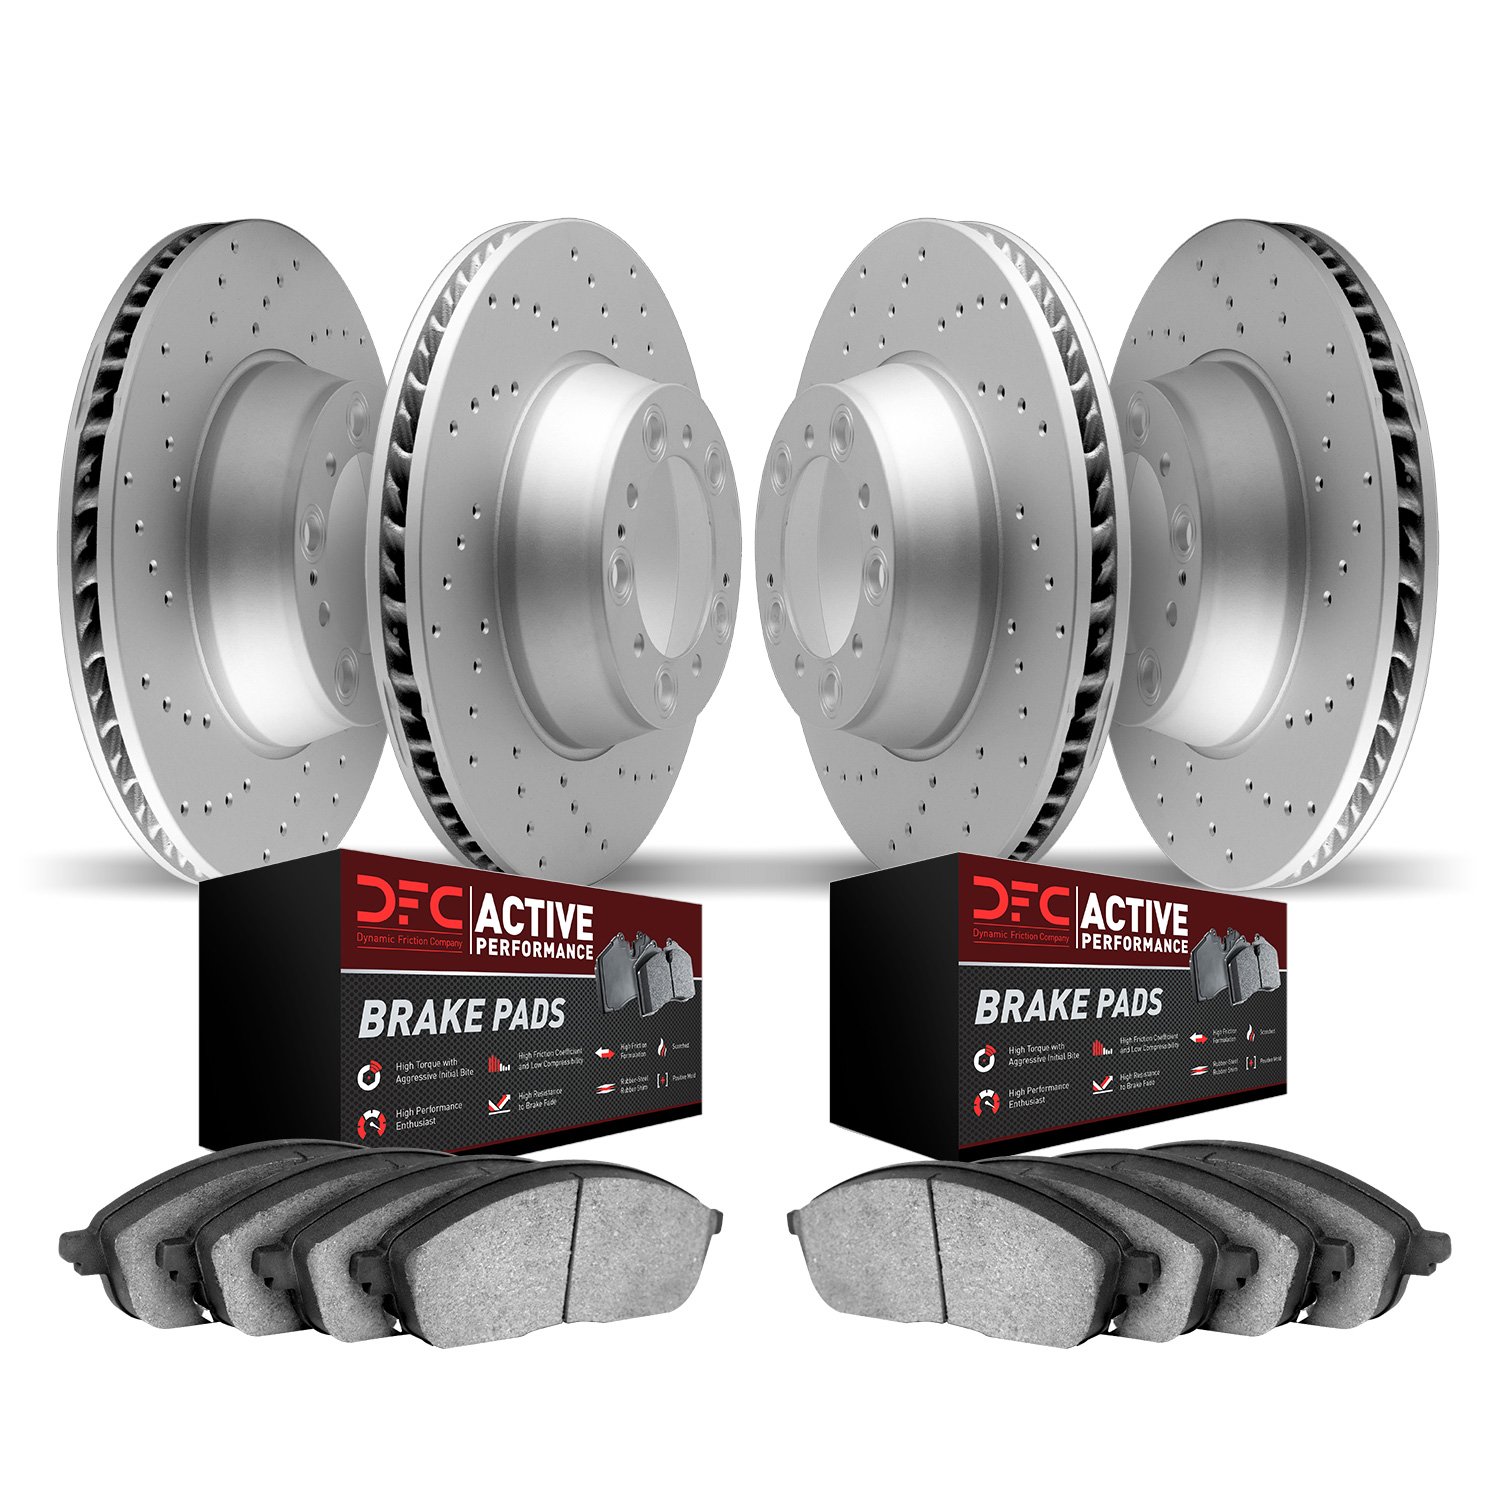 2704-68000 Geoperformance Drilled Brake Rotors with Active Performance Pads Kit, 2003-2008 Infiniti/Nissan, Position: Front and